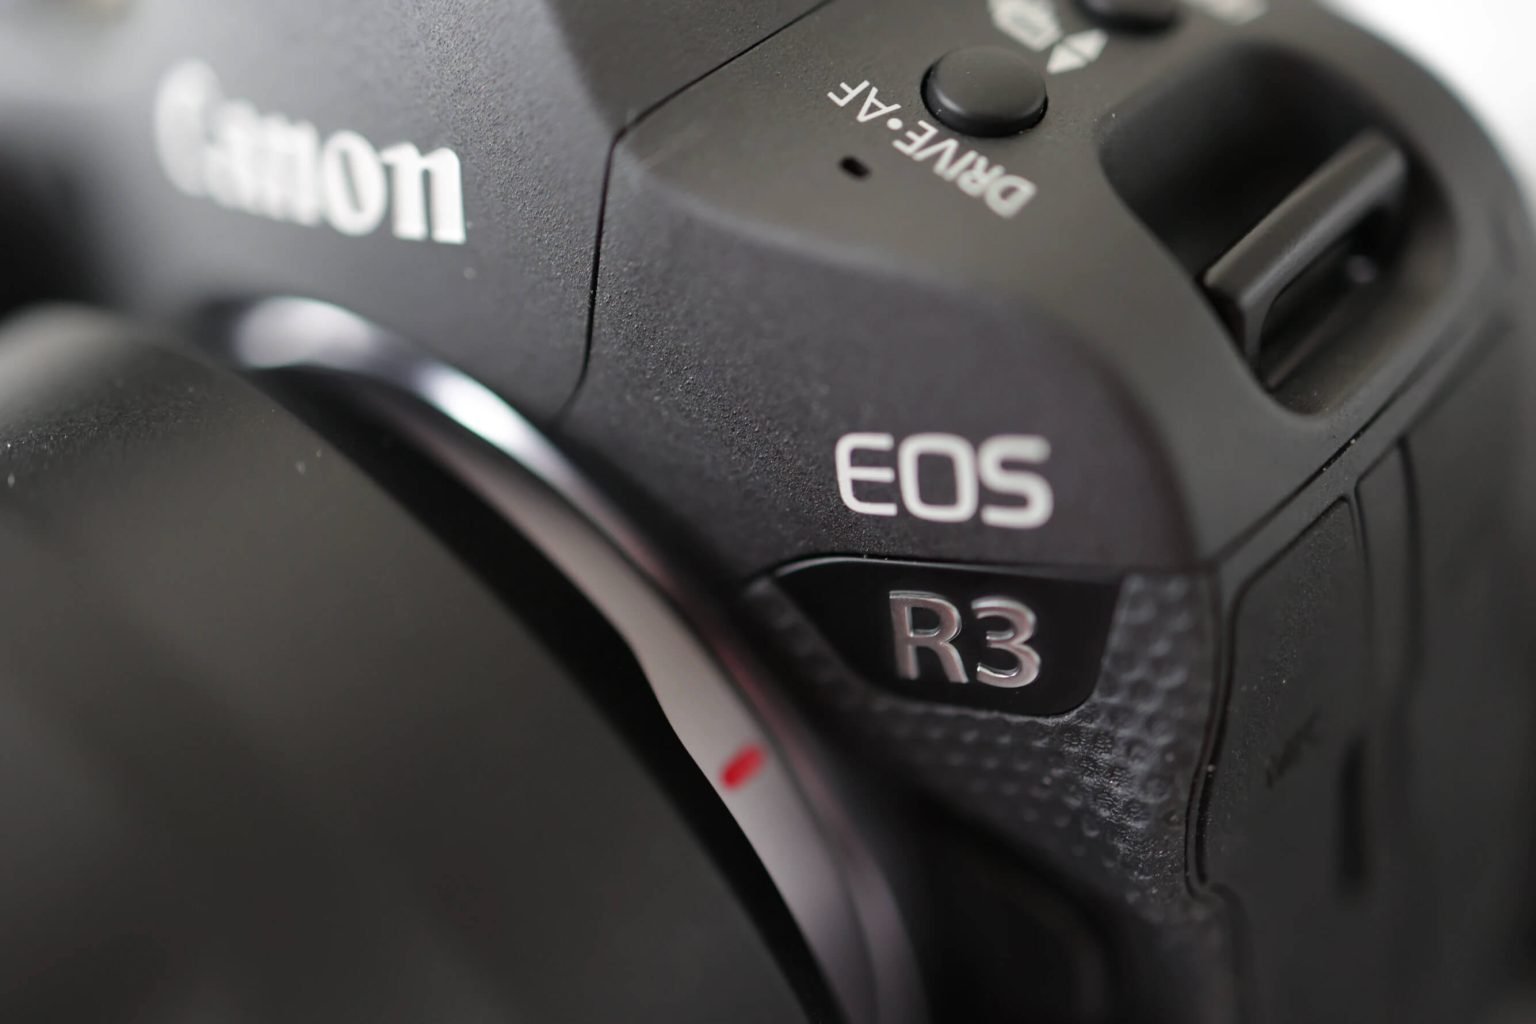 eosr3close 1536x1024 - Eye-controlled AF is coming to more EOS R cameras, but you'll have to be patient